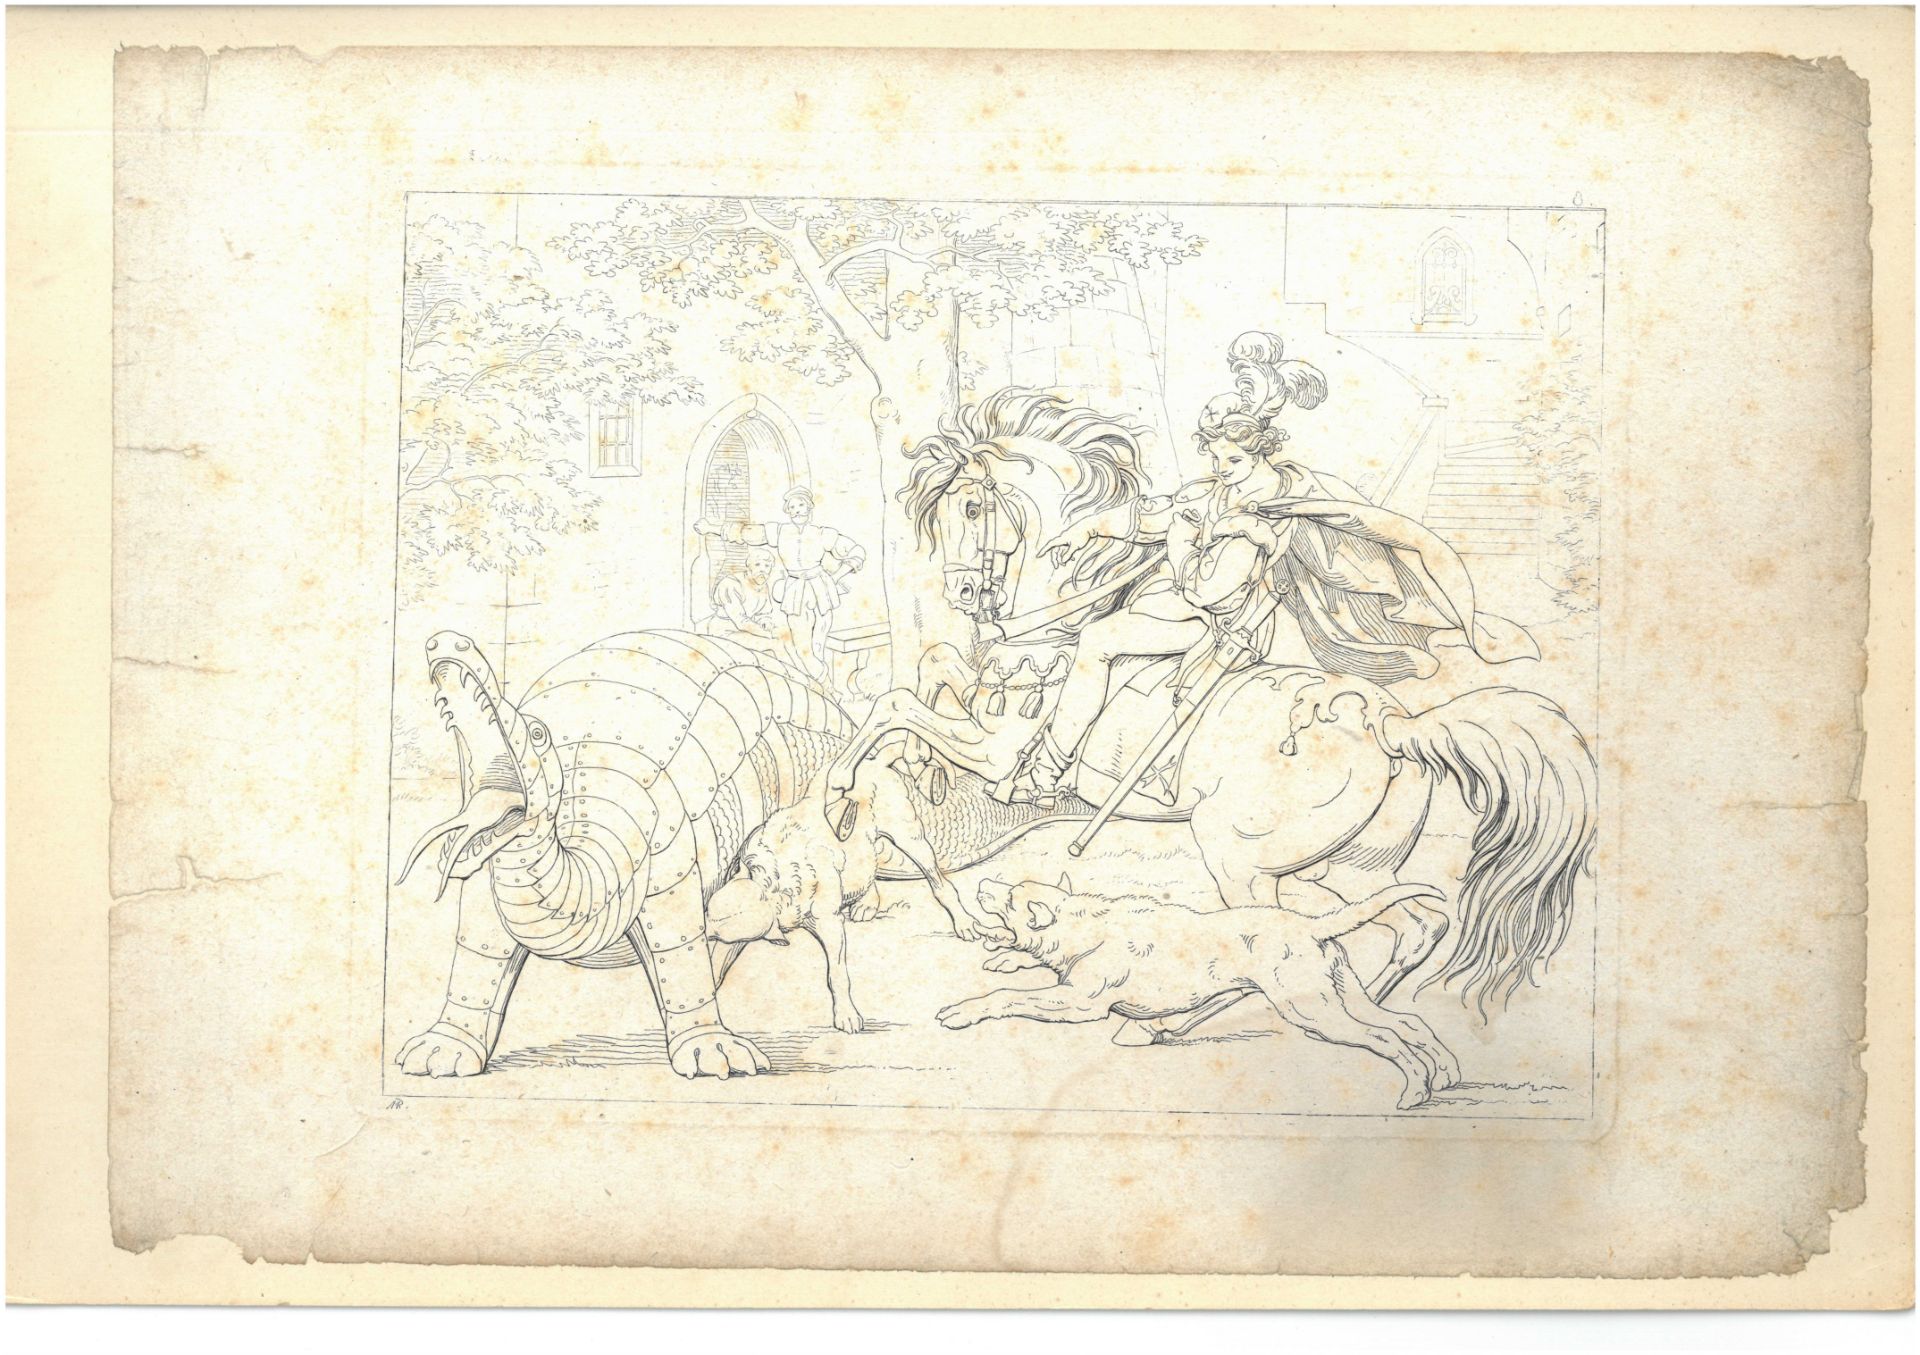 A portfolio of black and white illustration plates depicting the story of "Bolla" (possibly)  the - Image 8 of 18